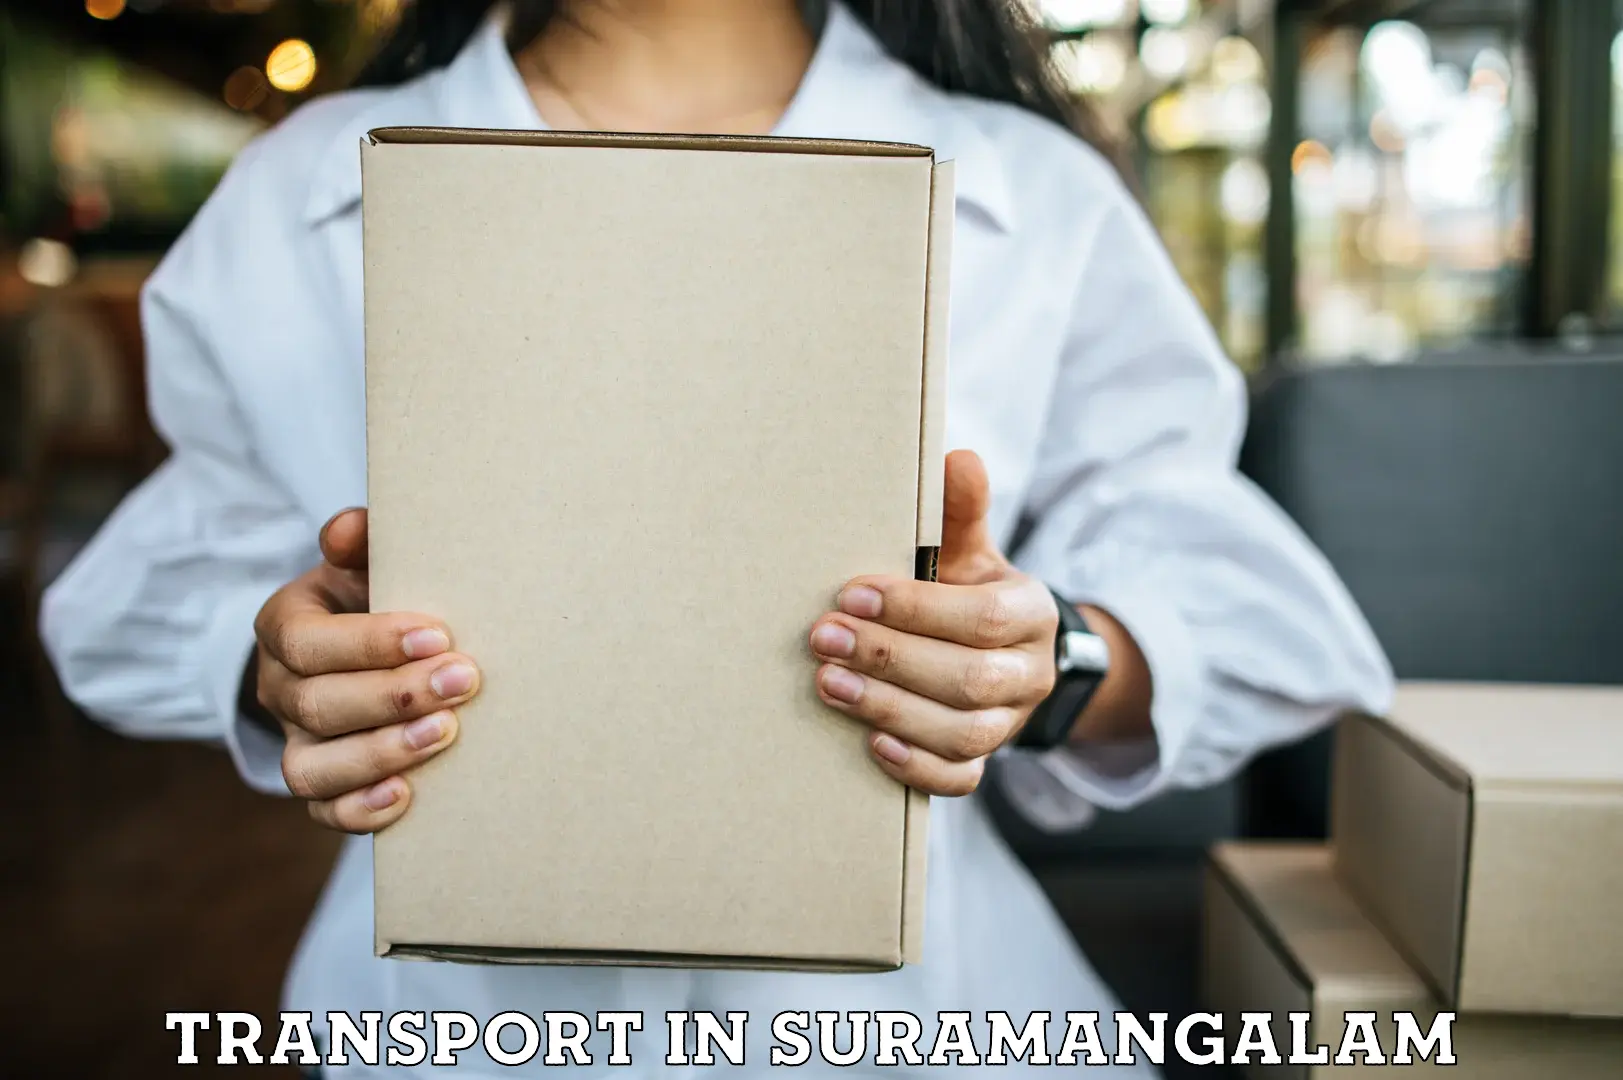 Transportation solution services in Suramangalam